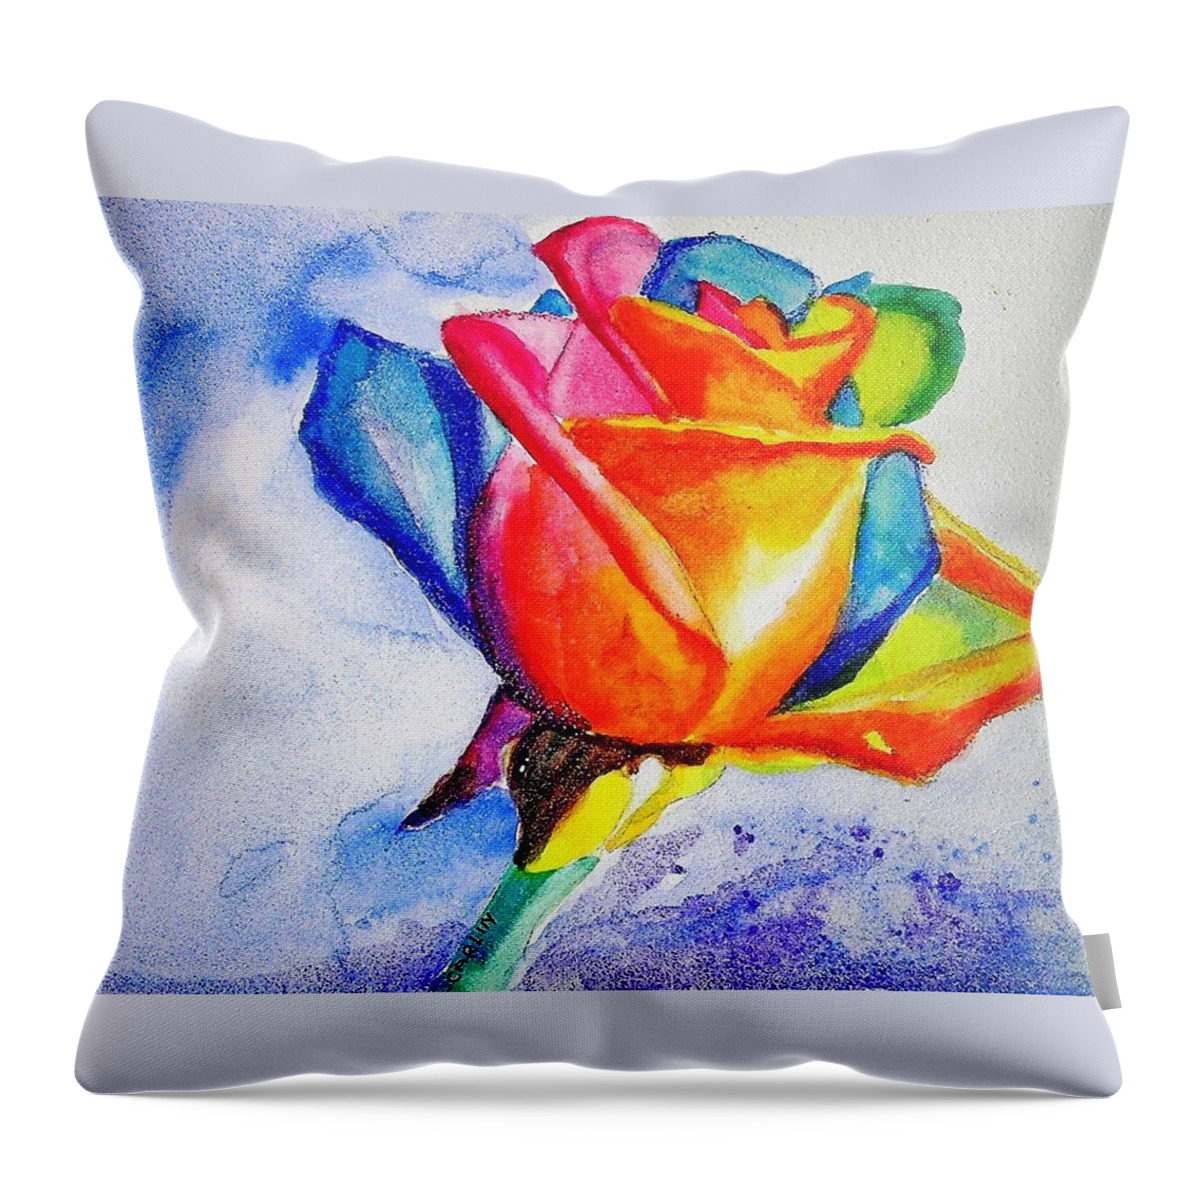 Rose Throw Pillow featuring the painting Rainbow Rose by Carlin Blahnik CarlinArtWatercolor